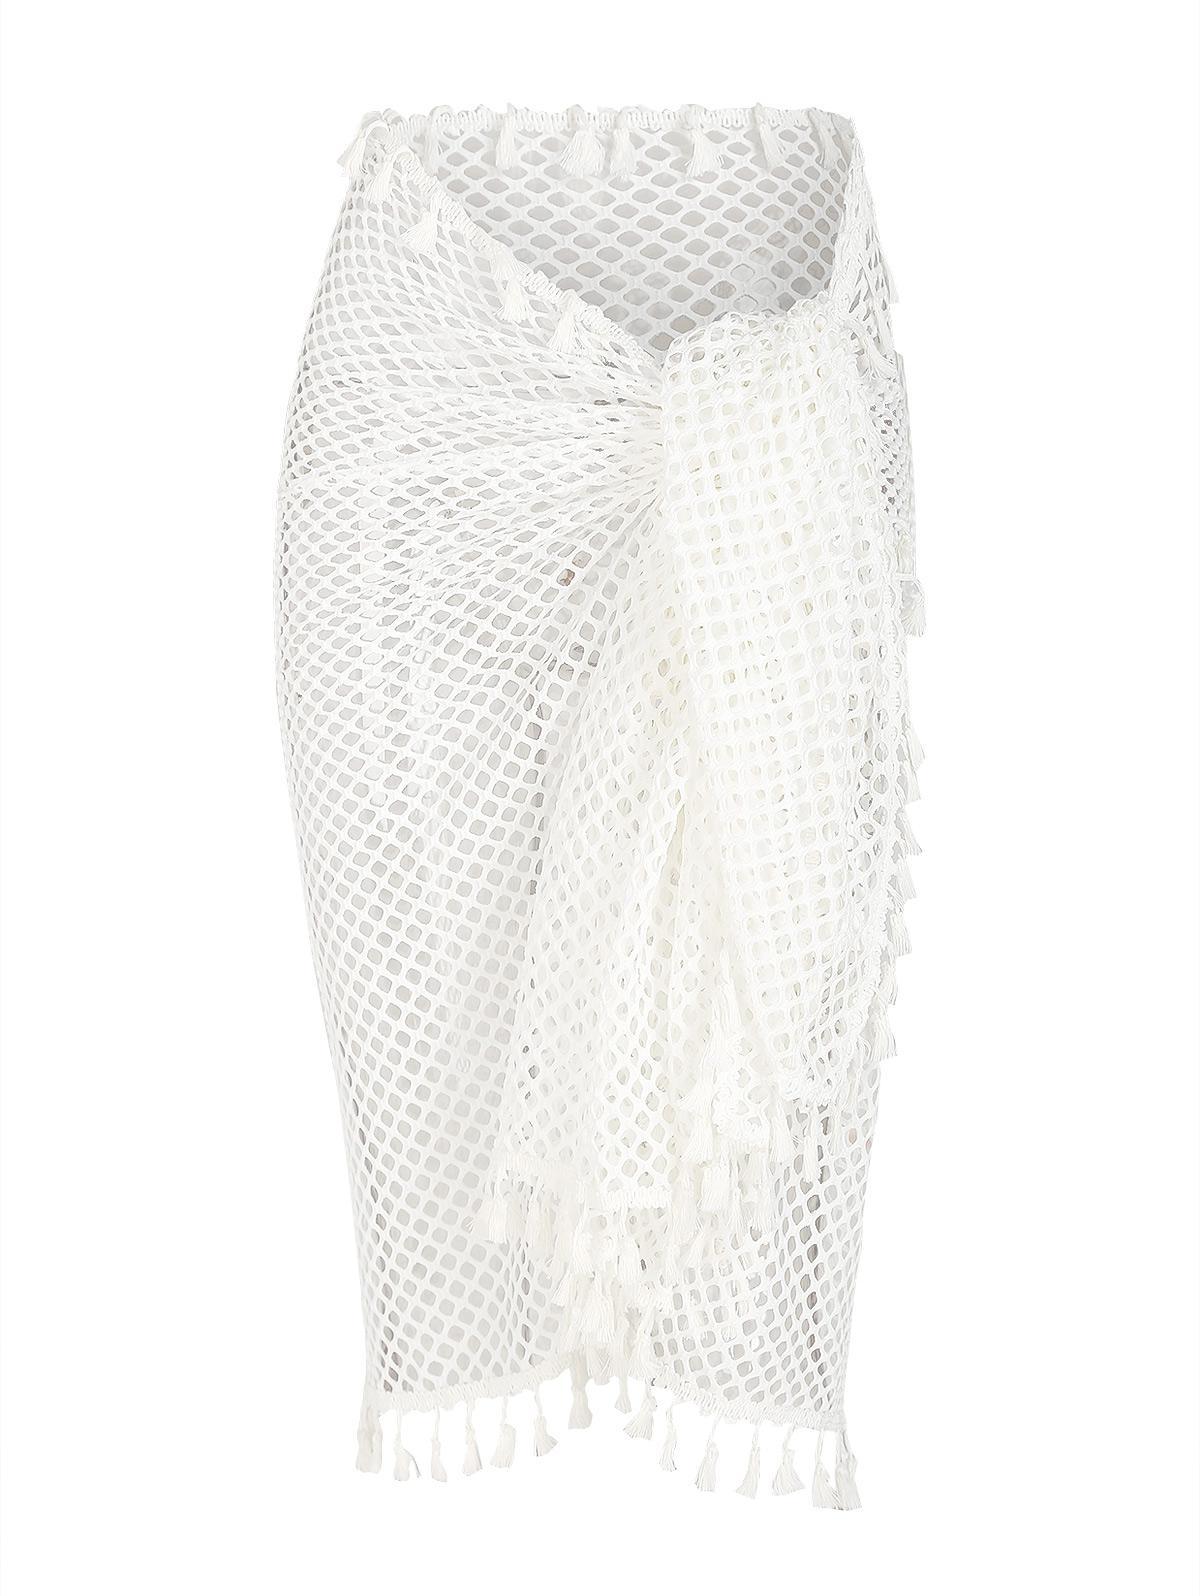 Zaful Beach Convertible Multiway Sheer Net Beach Throw Tie Cover Up Sarong  in White | Lyst